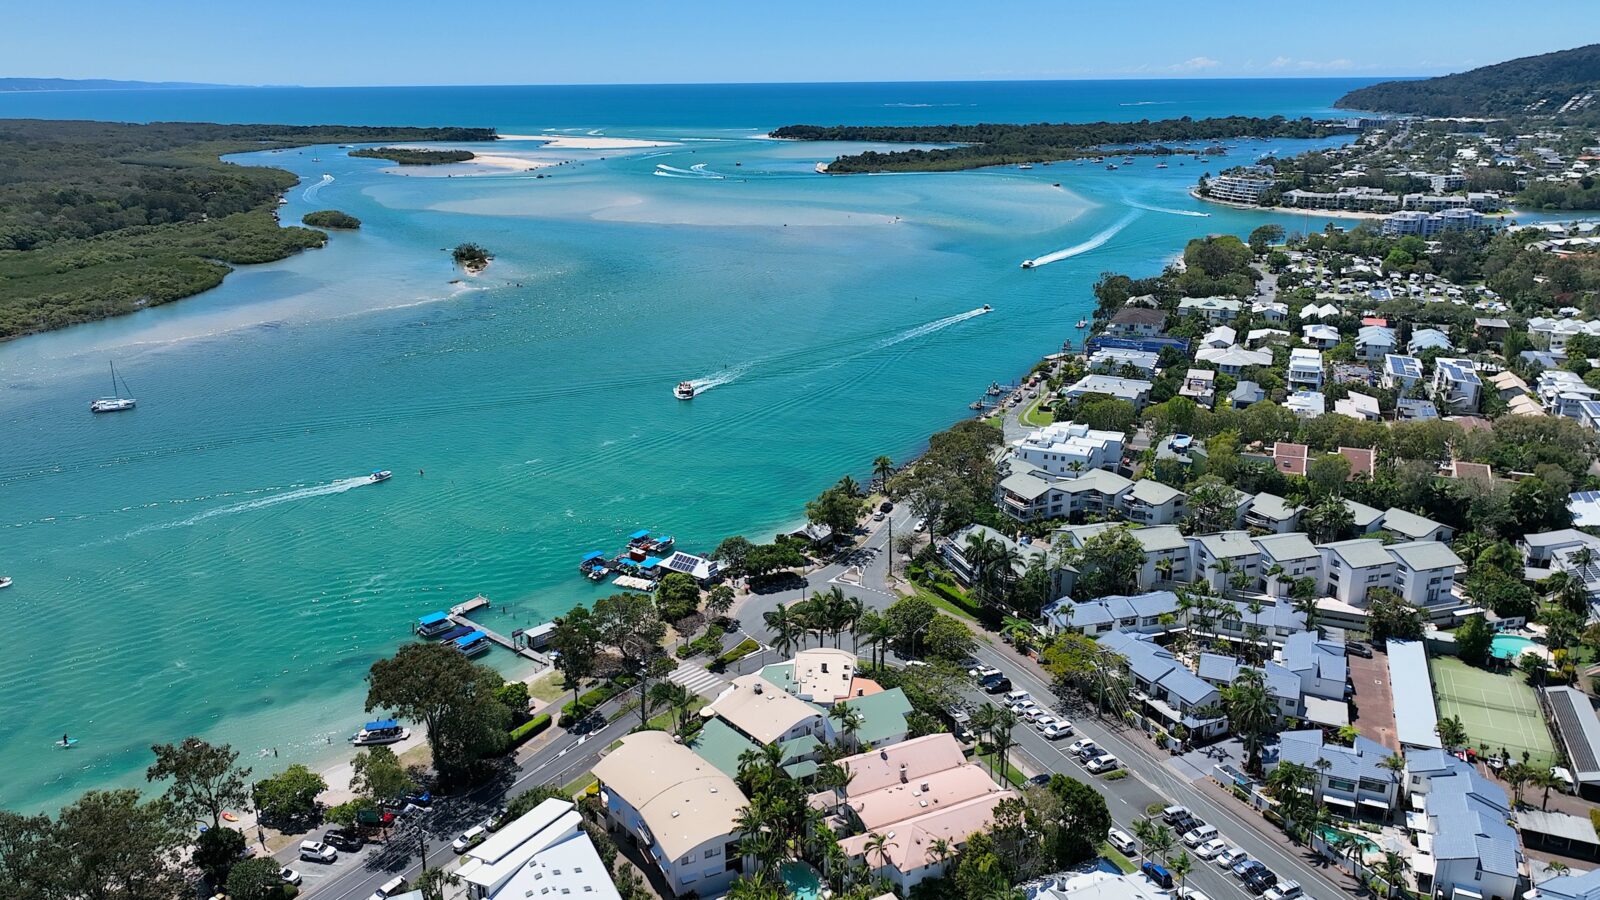 Situated on the beautiful Noosa River